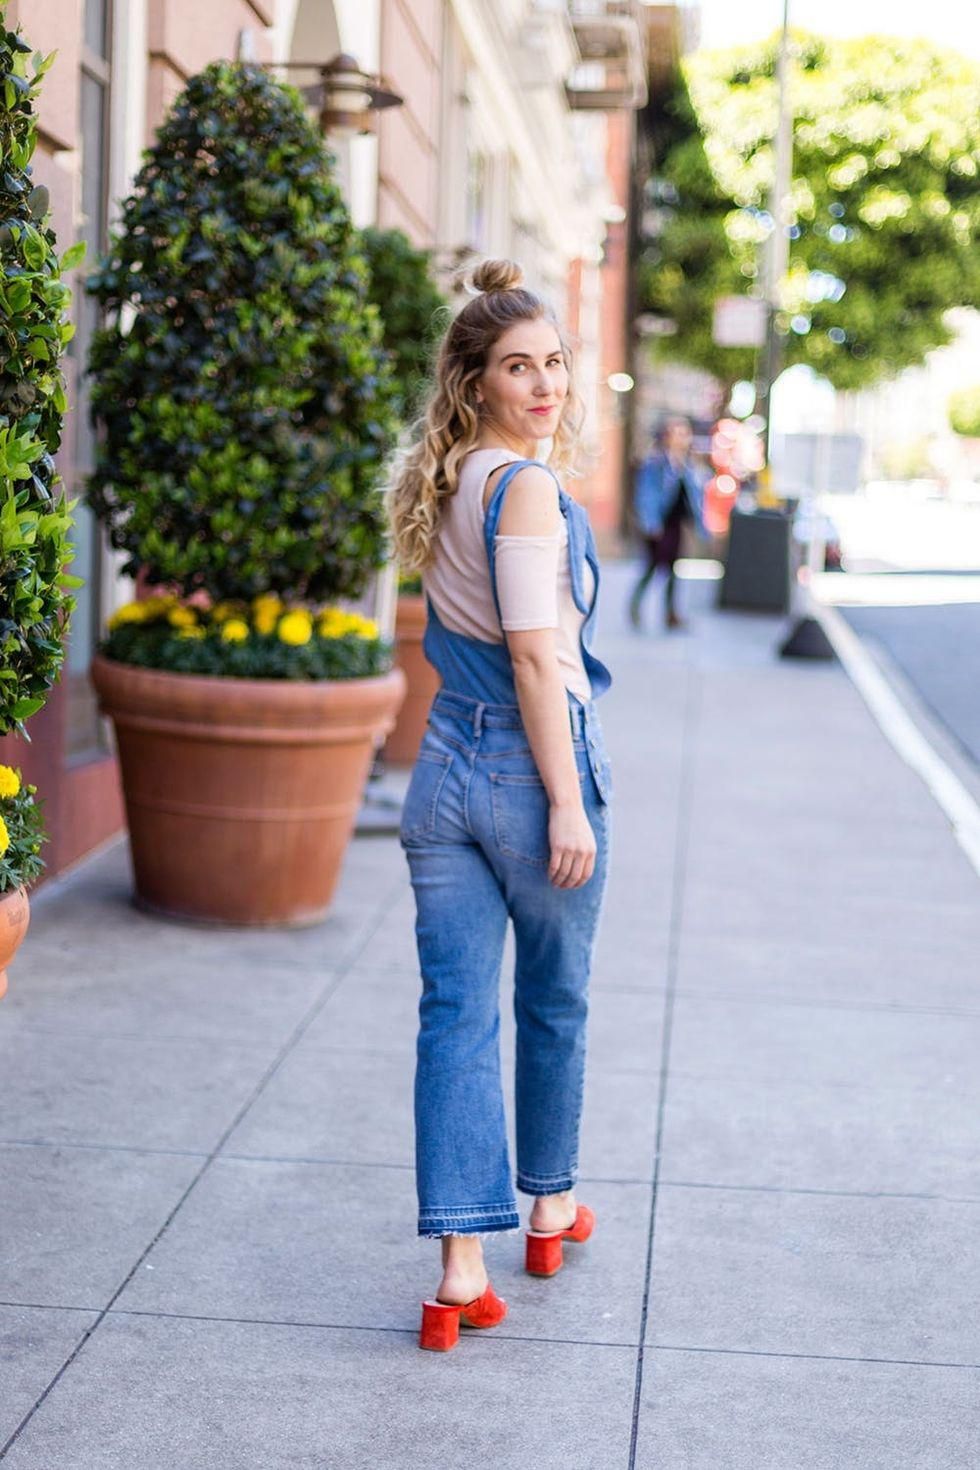 model wears overalls with red heels and pink top outside